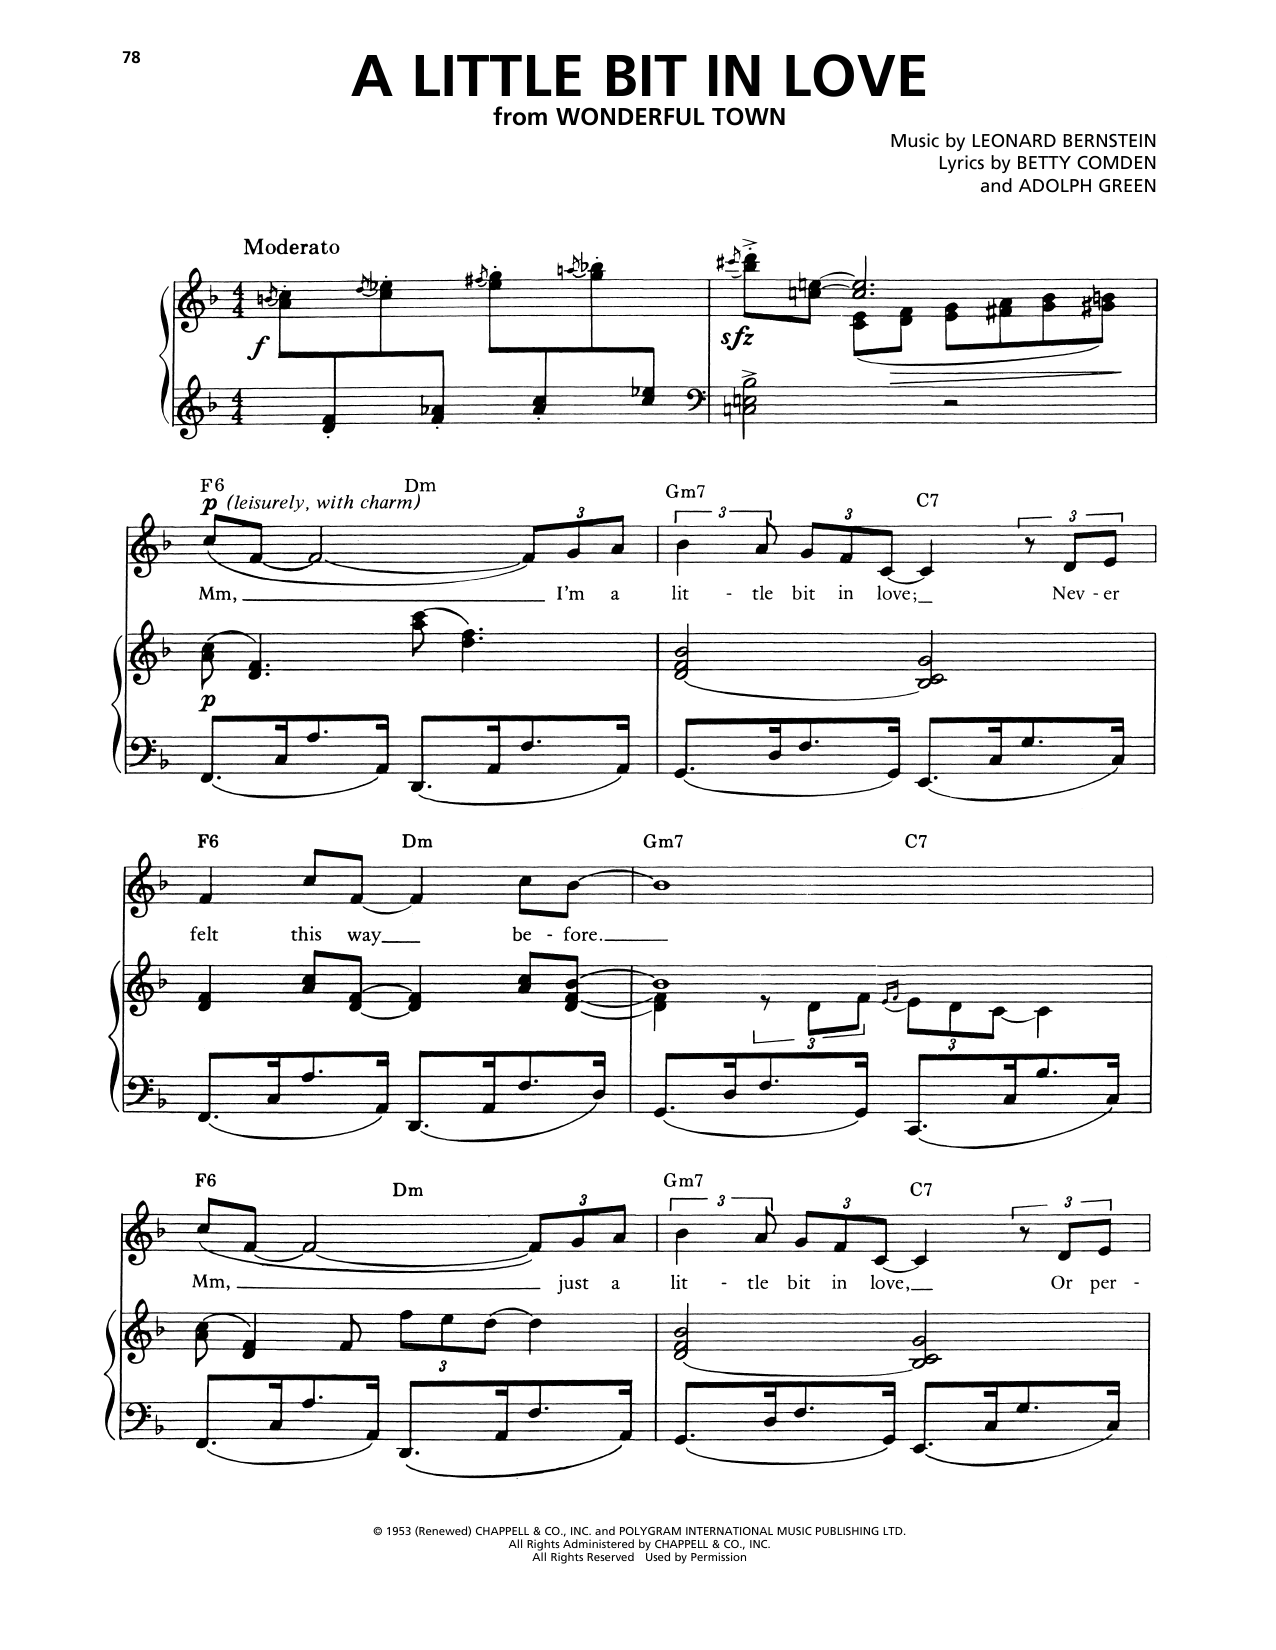 Download Audra McDonald A Little Bit In Love (from Wonderful To Sheet Music